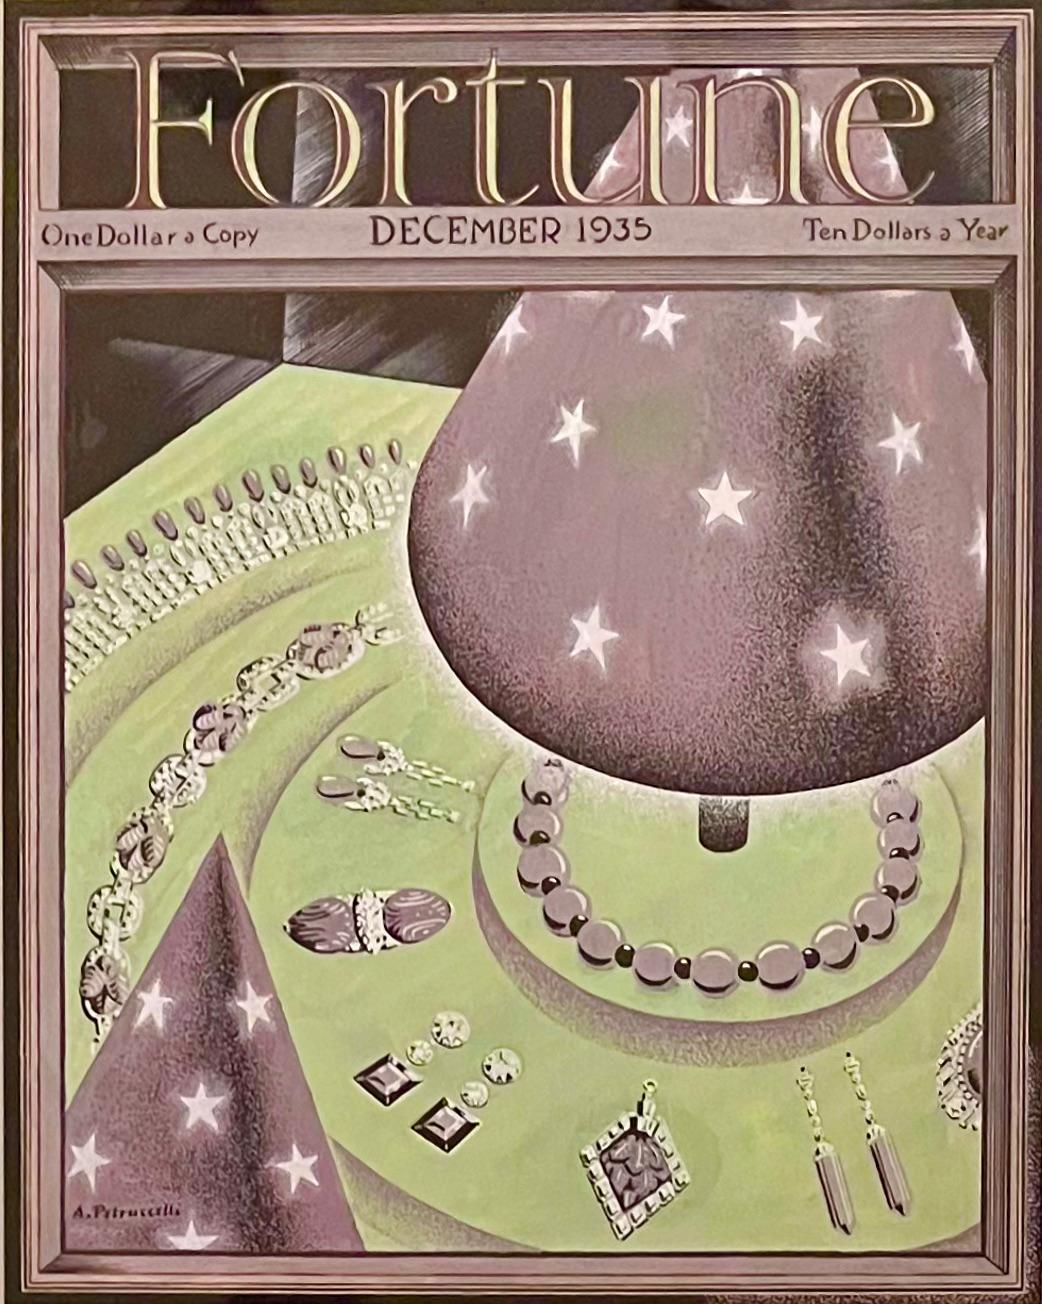 Antonio Petruccelli Still-Life - Original Painting Published Fortune Mag Cover 1935 Jewels Jewelry Illustration